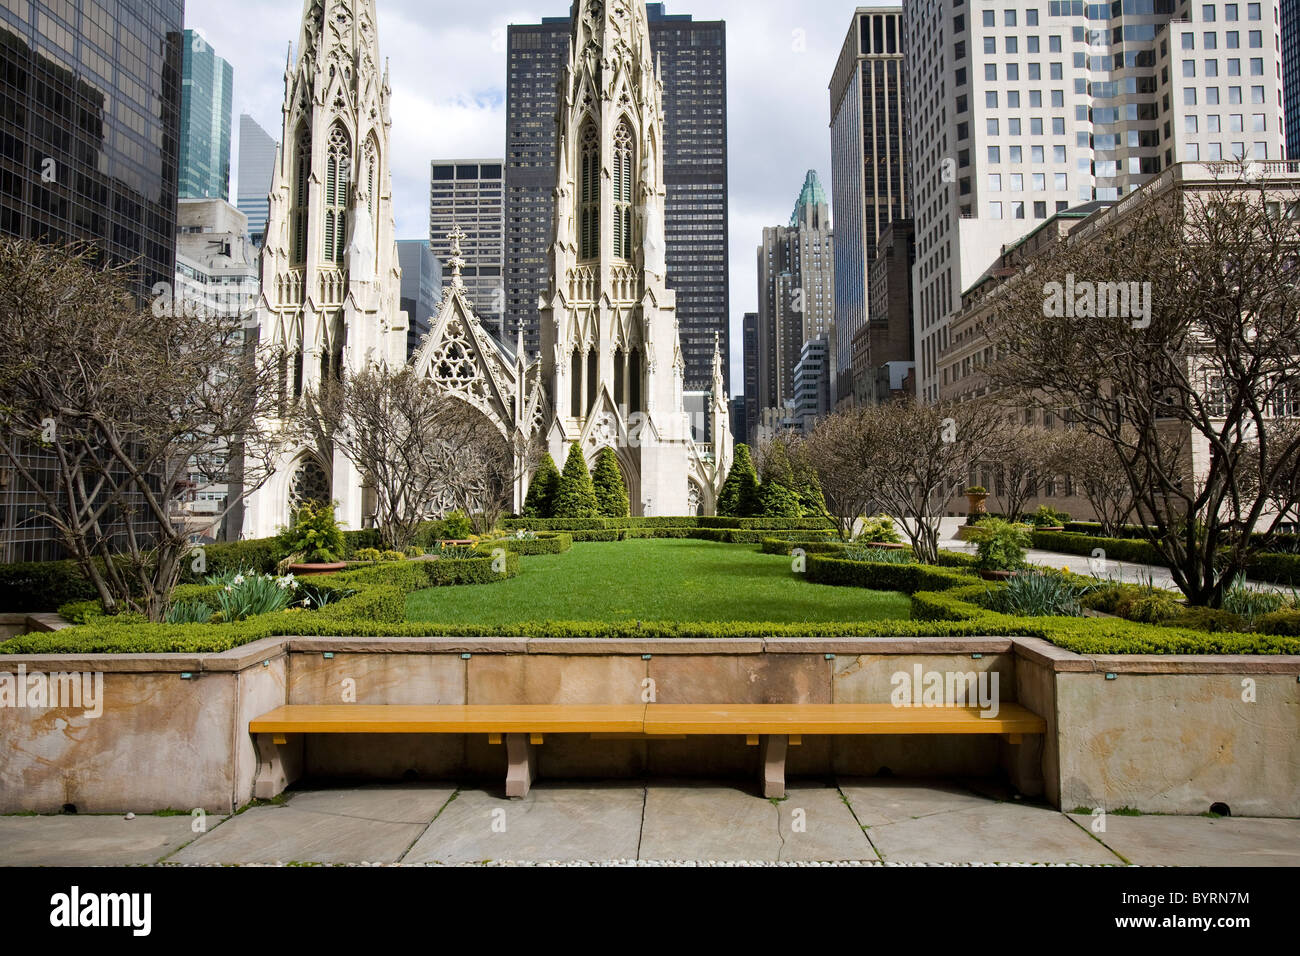 Seventh floor roof garden at 45 Rockefeller Plaza, NY, New York facing Saint Patrick's Cathedral on Fifth ave. Stock Photo